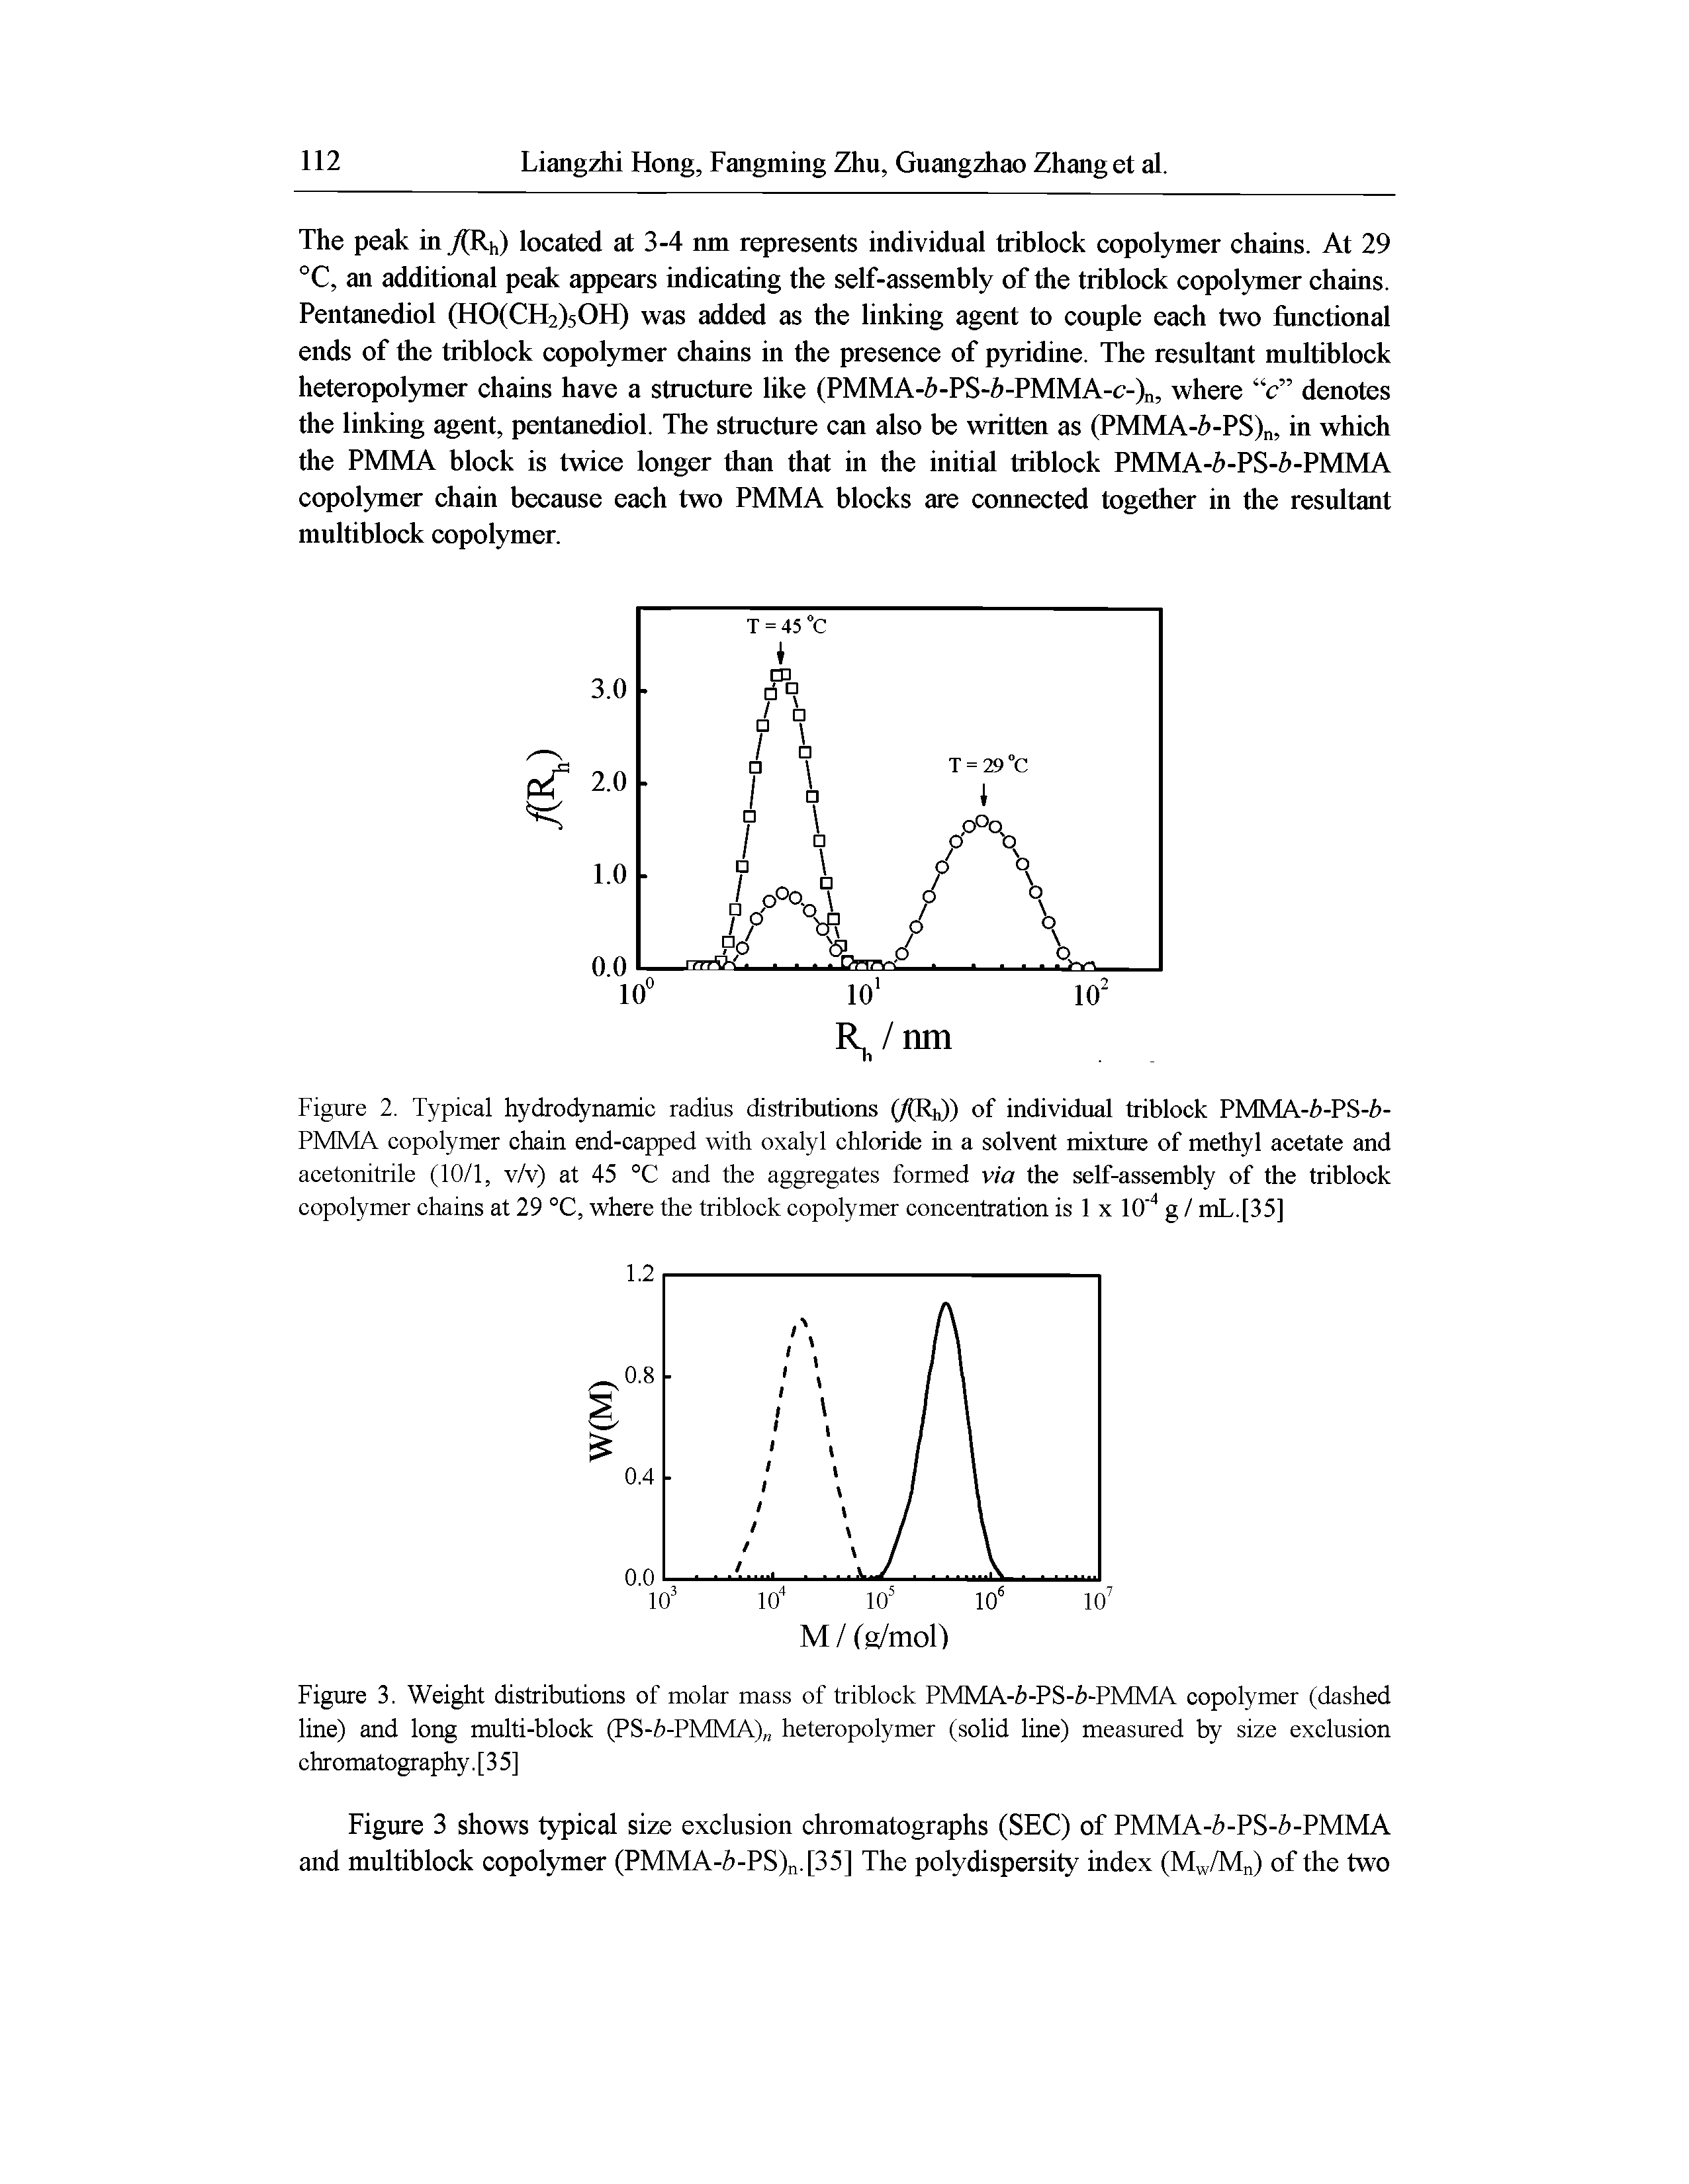 Figure 2. Typical hydrodynamic radius distributions (/(RjO) of individual triblock PMMA-Z>-PS-Z>-PMMA copolymer chain end-capped with oxalyl chloride in a solvent mixture of methyl acetate and acetonitrile (10/1, v/v) at 45 °C and the aggregates formed via the self-assembly of the triblock copolymer chains at 29 °C, where the triblock copolymer concentration is 1 x 10 4 g / mL.[35]...